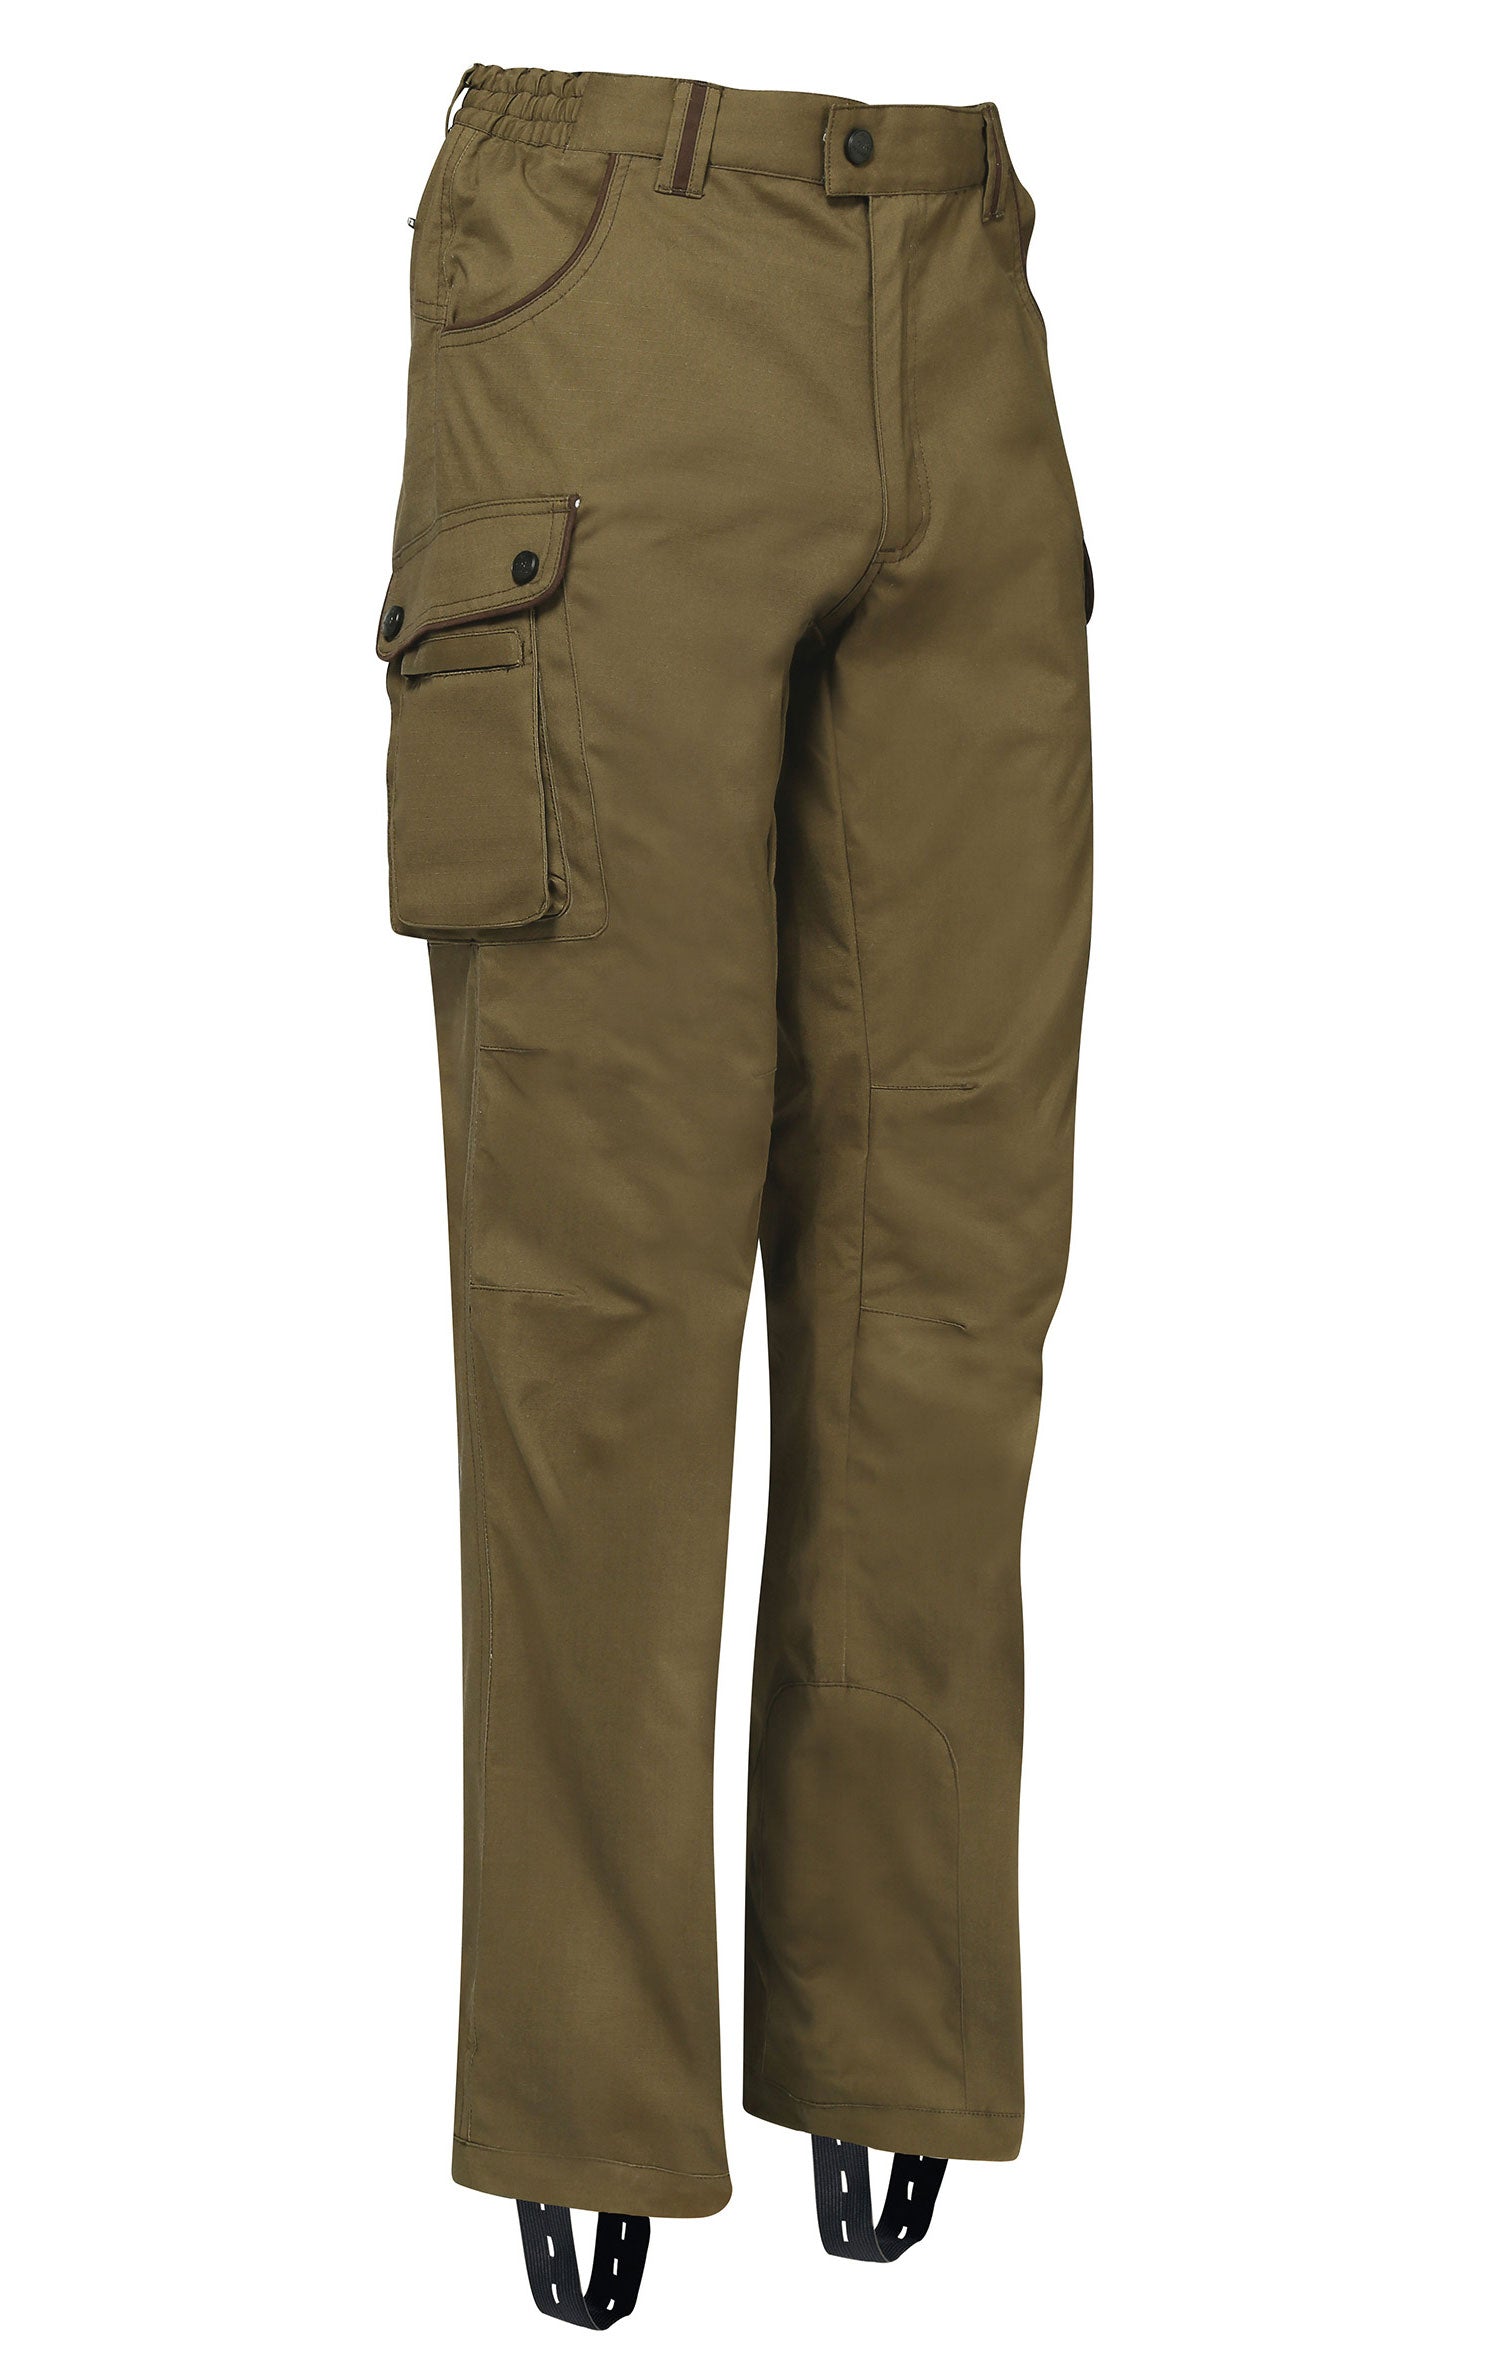 Verney Carron Grouse Trousers